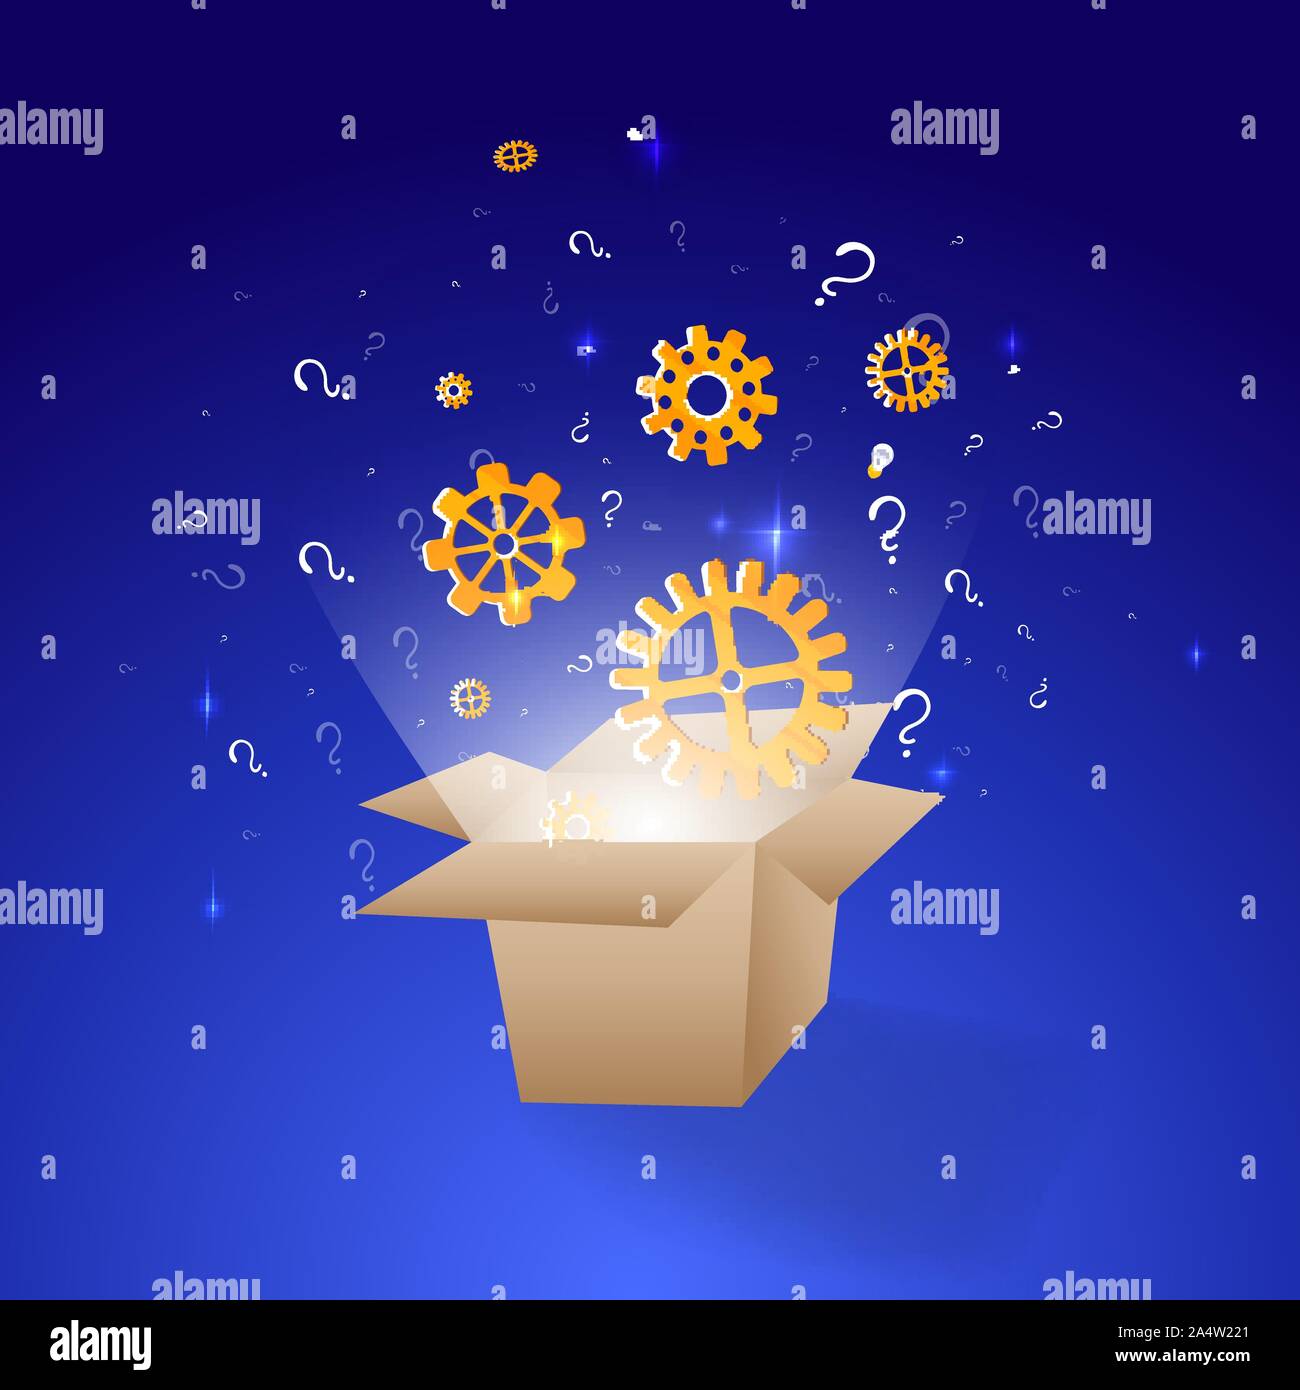 Everything begins with a creative idea poster, cute vector cartoon illustration for web and print. Box with gears bokeh lights, innovation smart inspi Stock Vector